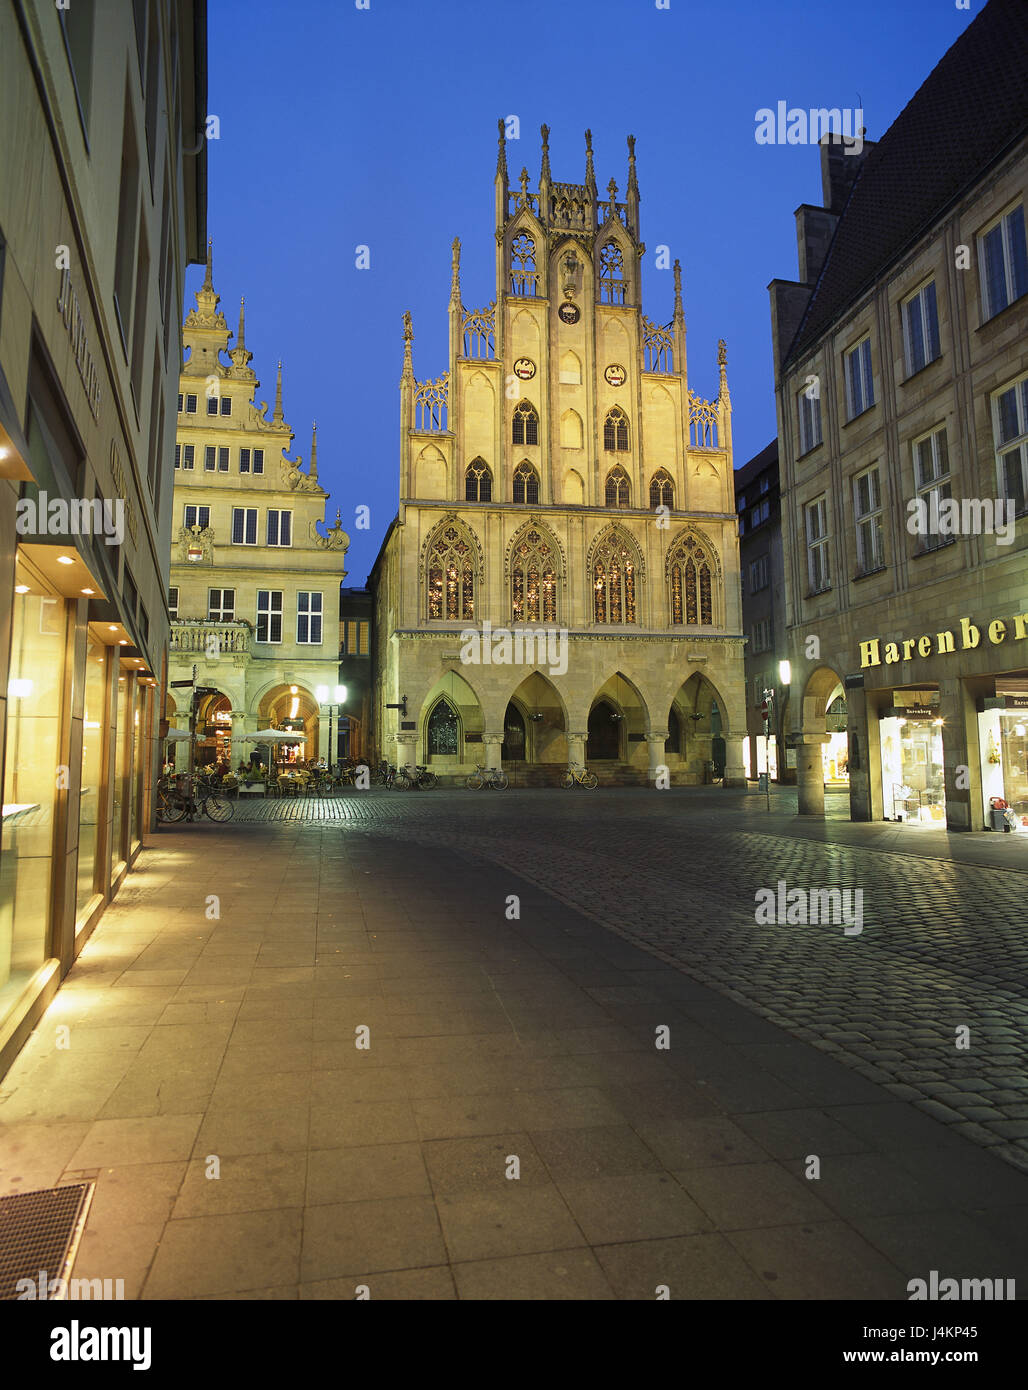 Germany, North Rhine-Westphalia, Münster, theatre director's market, town wine tavern, in 1615 - 16, lighting, evening Europe, town, centre, Marktstrasse, shopping street, pedestrian area, shops, buildings, structure, Renaissance, architectural style, architecture, place of interest, evening tuning Stock Photo